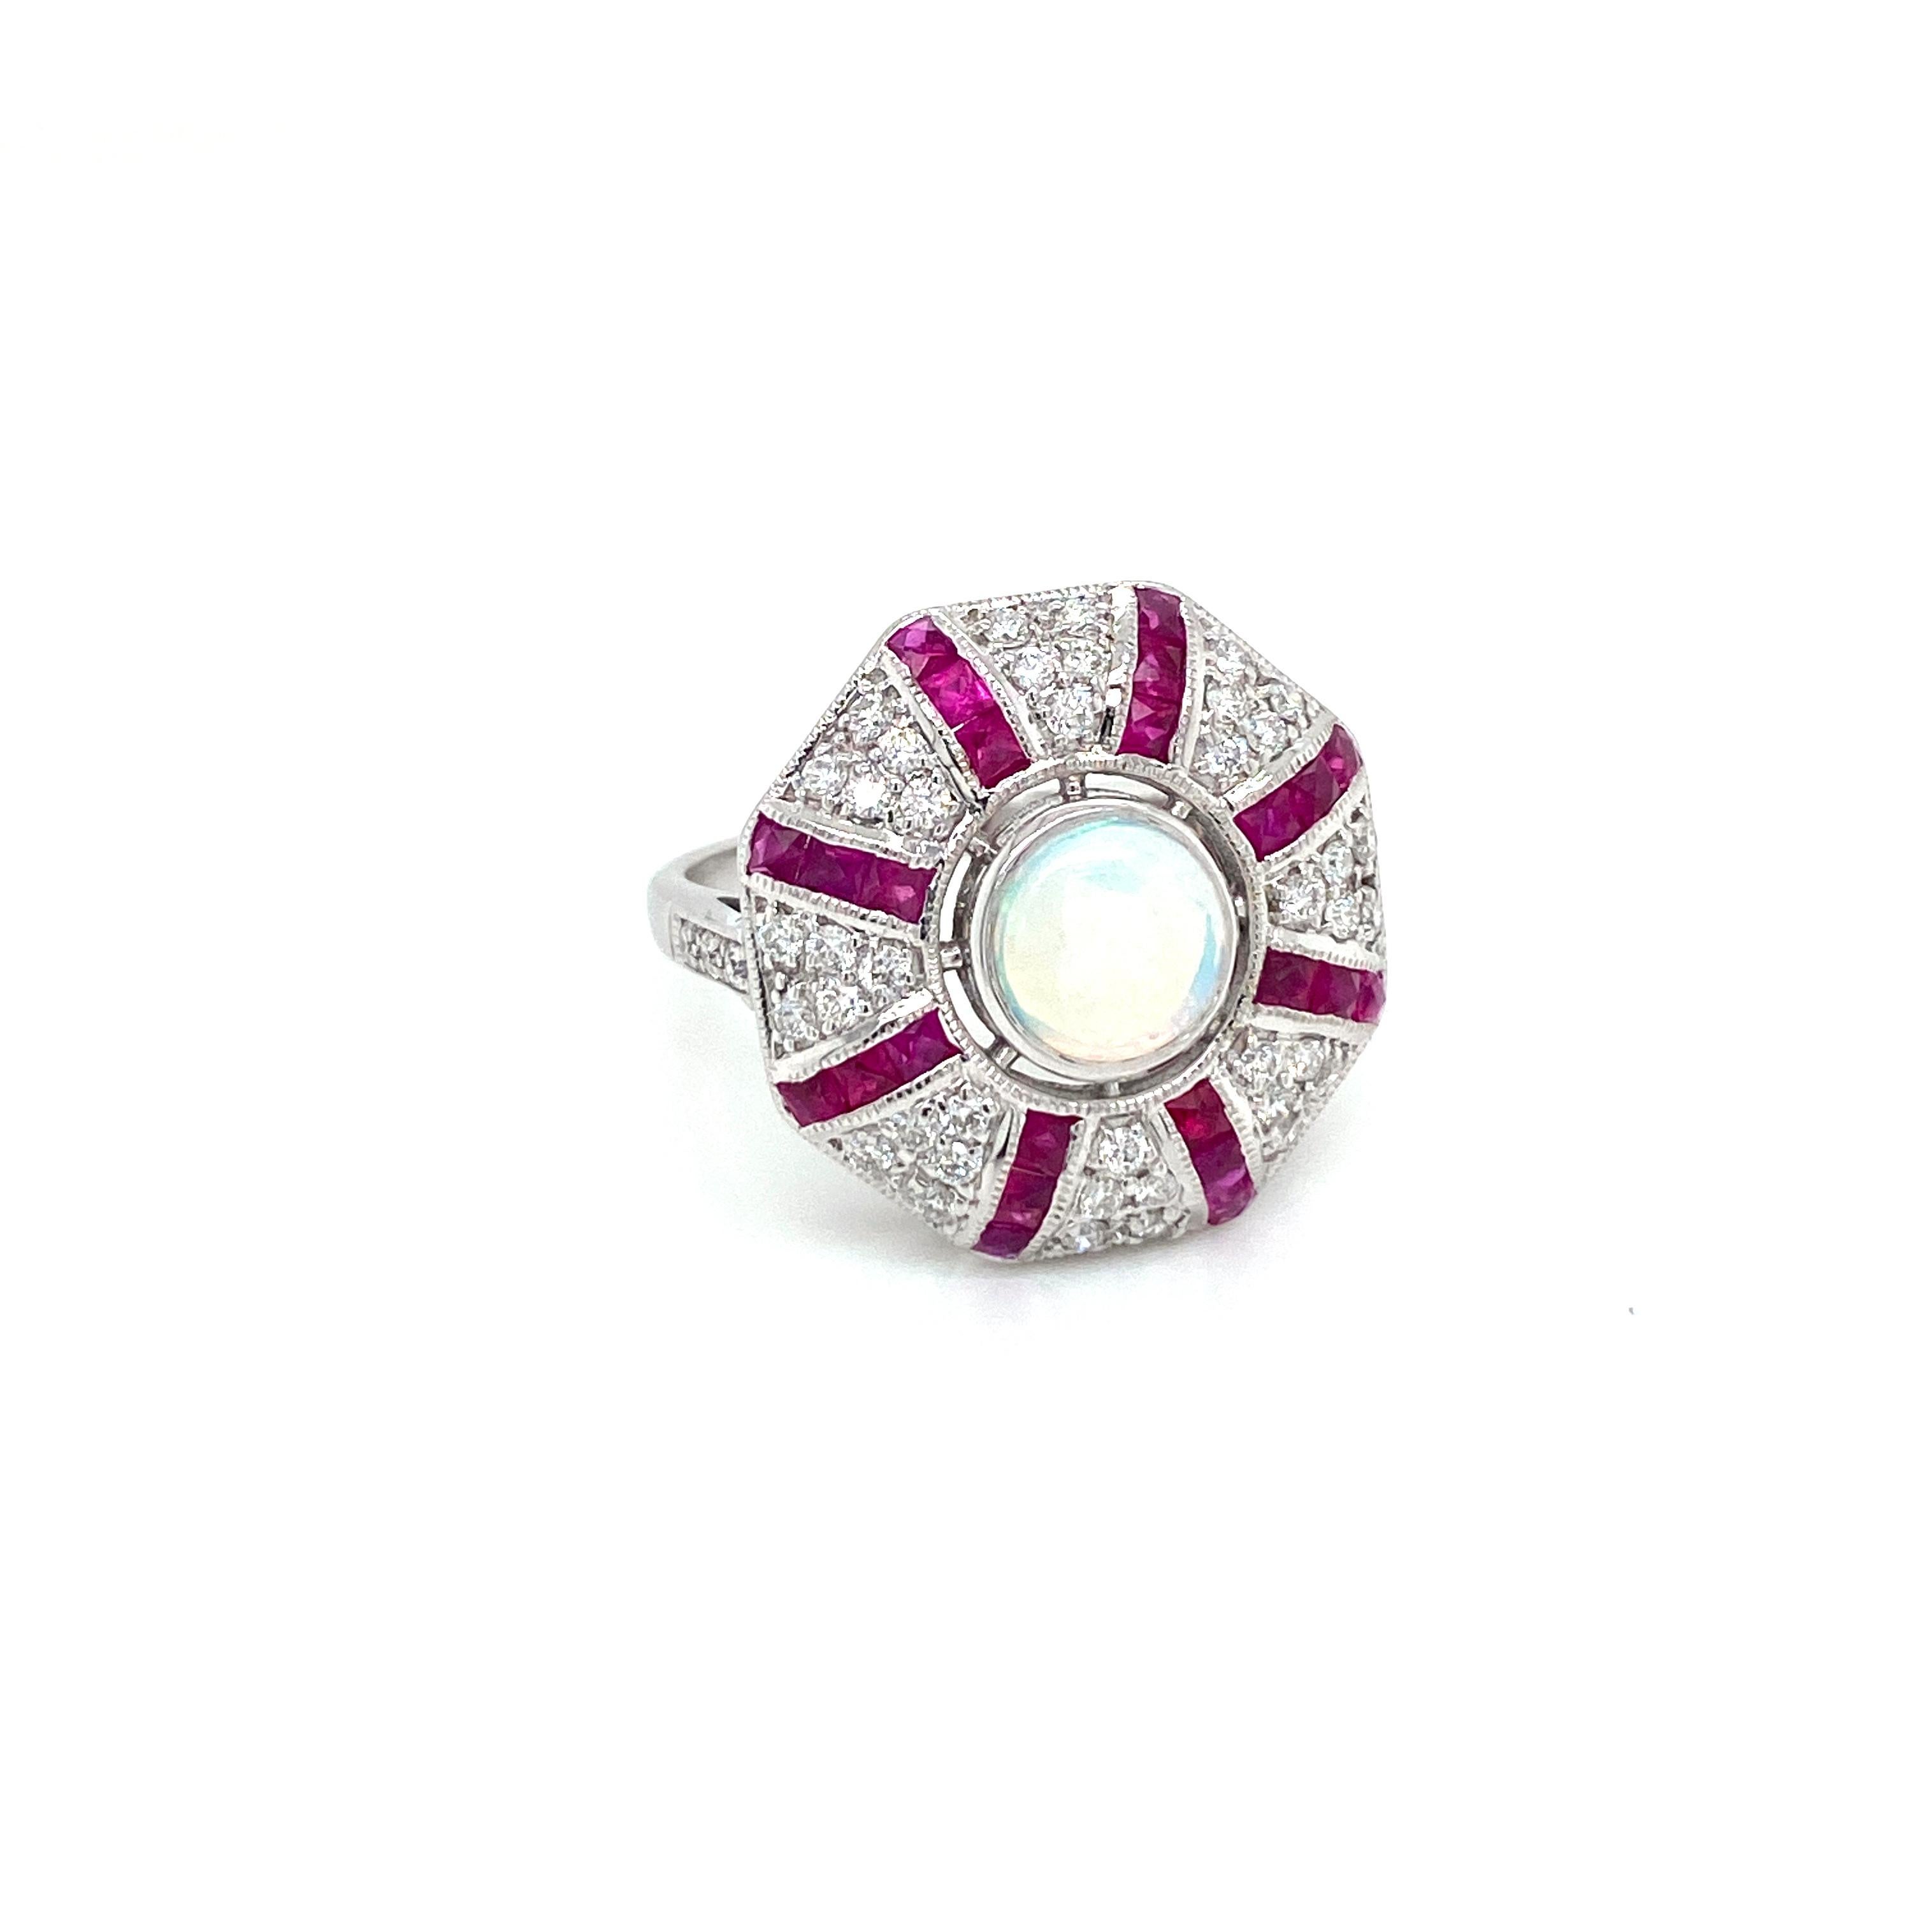 Beautiful Gold handmade Art Deco style ring.
It is set in 14k white Gold featuring a large sparkling vivid Opal in the center, weight 5,50 ct., surrounded by 1.00 ct custom cut natural Ruby and Round brilliant cut diamonds totaling 0.80 carats G/H